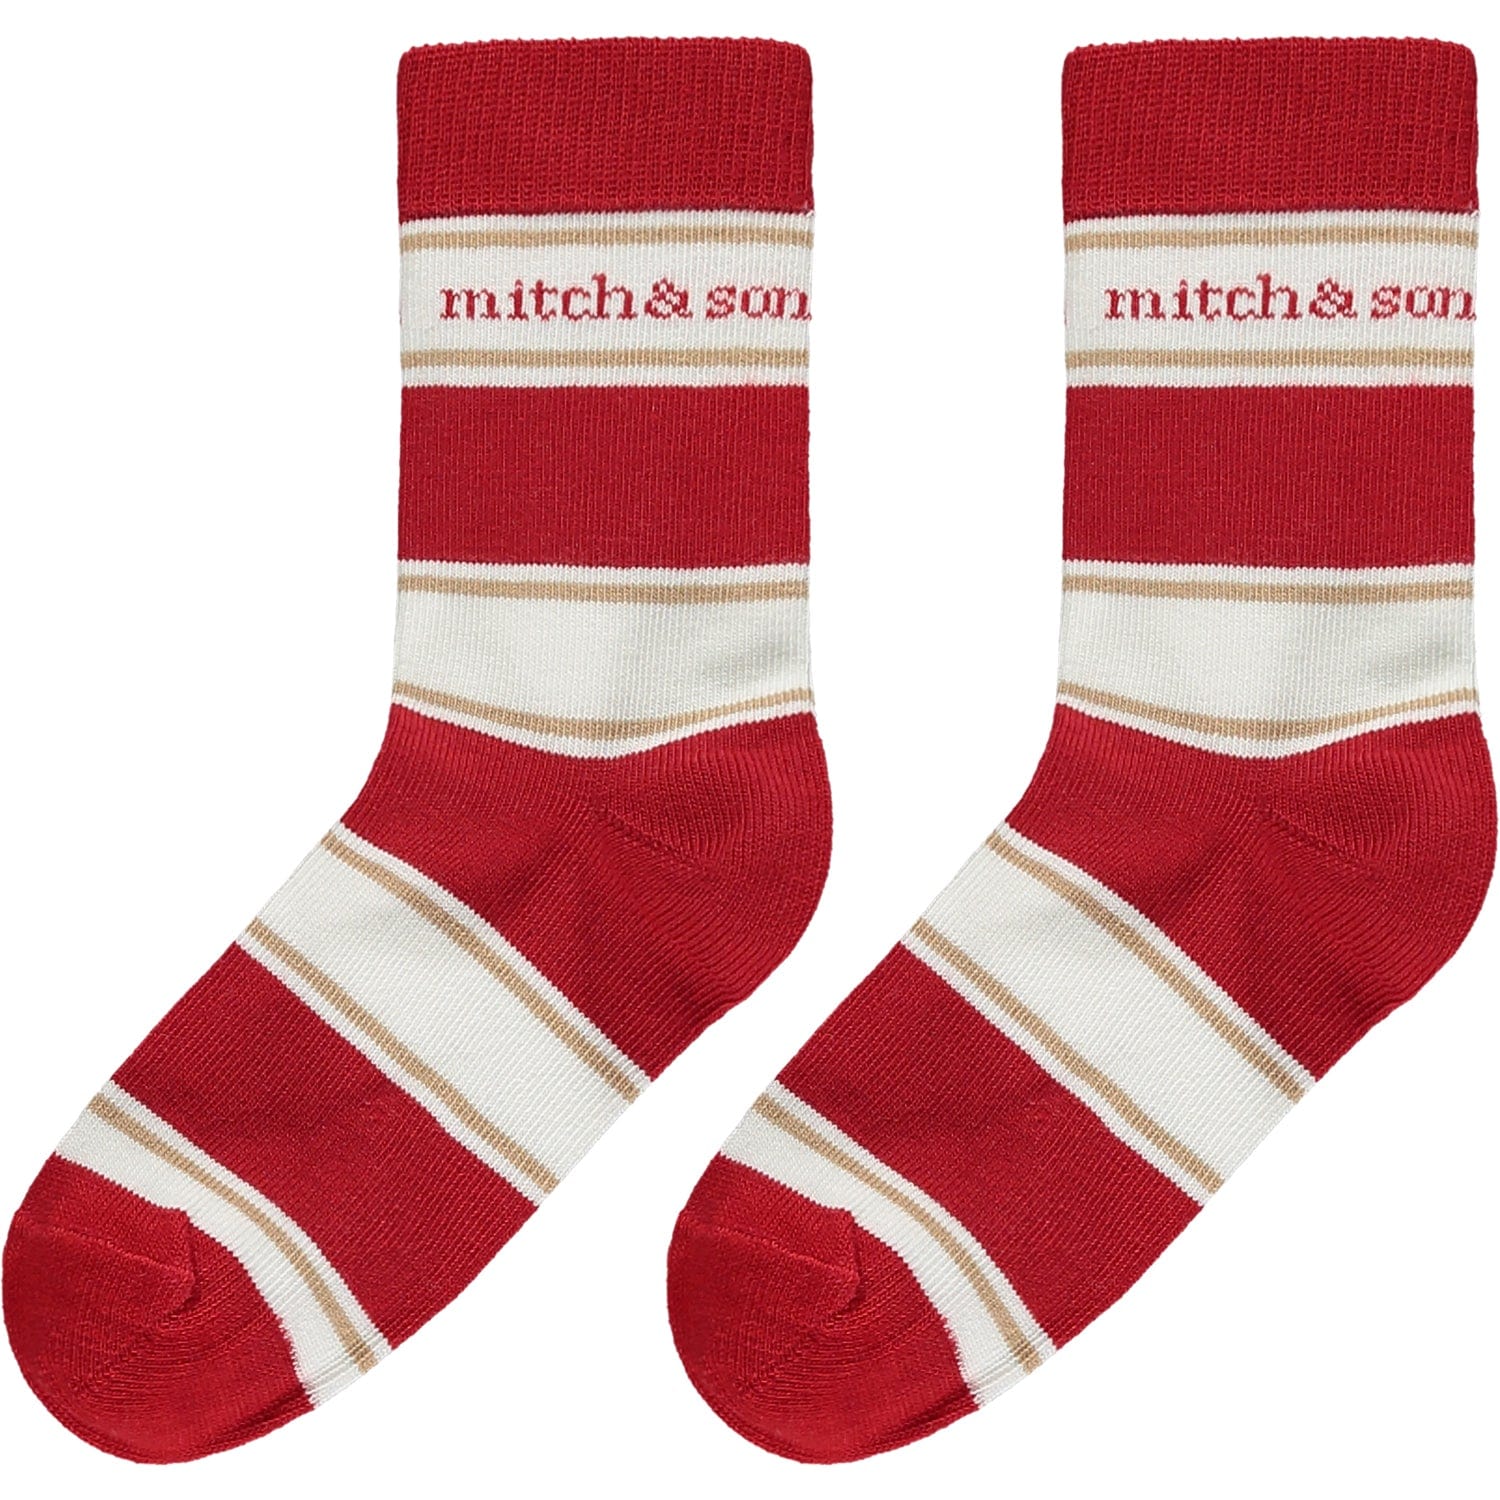 Mitch & Son Socks & Tights 18m / Red Mitch & Son Red OSWALD 2 pack socks